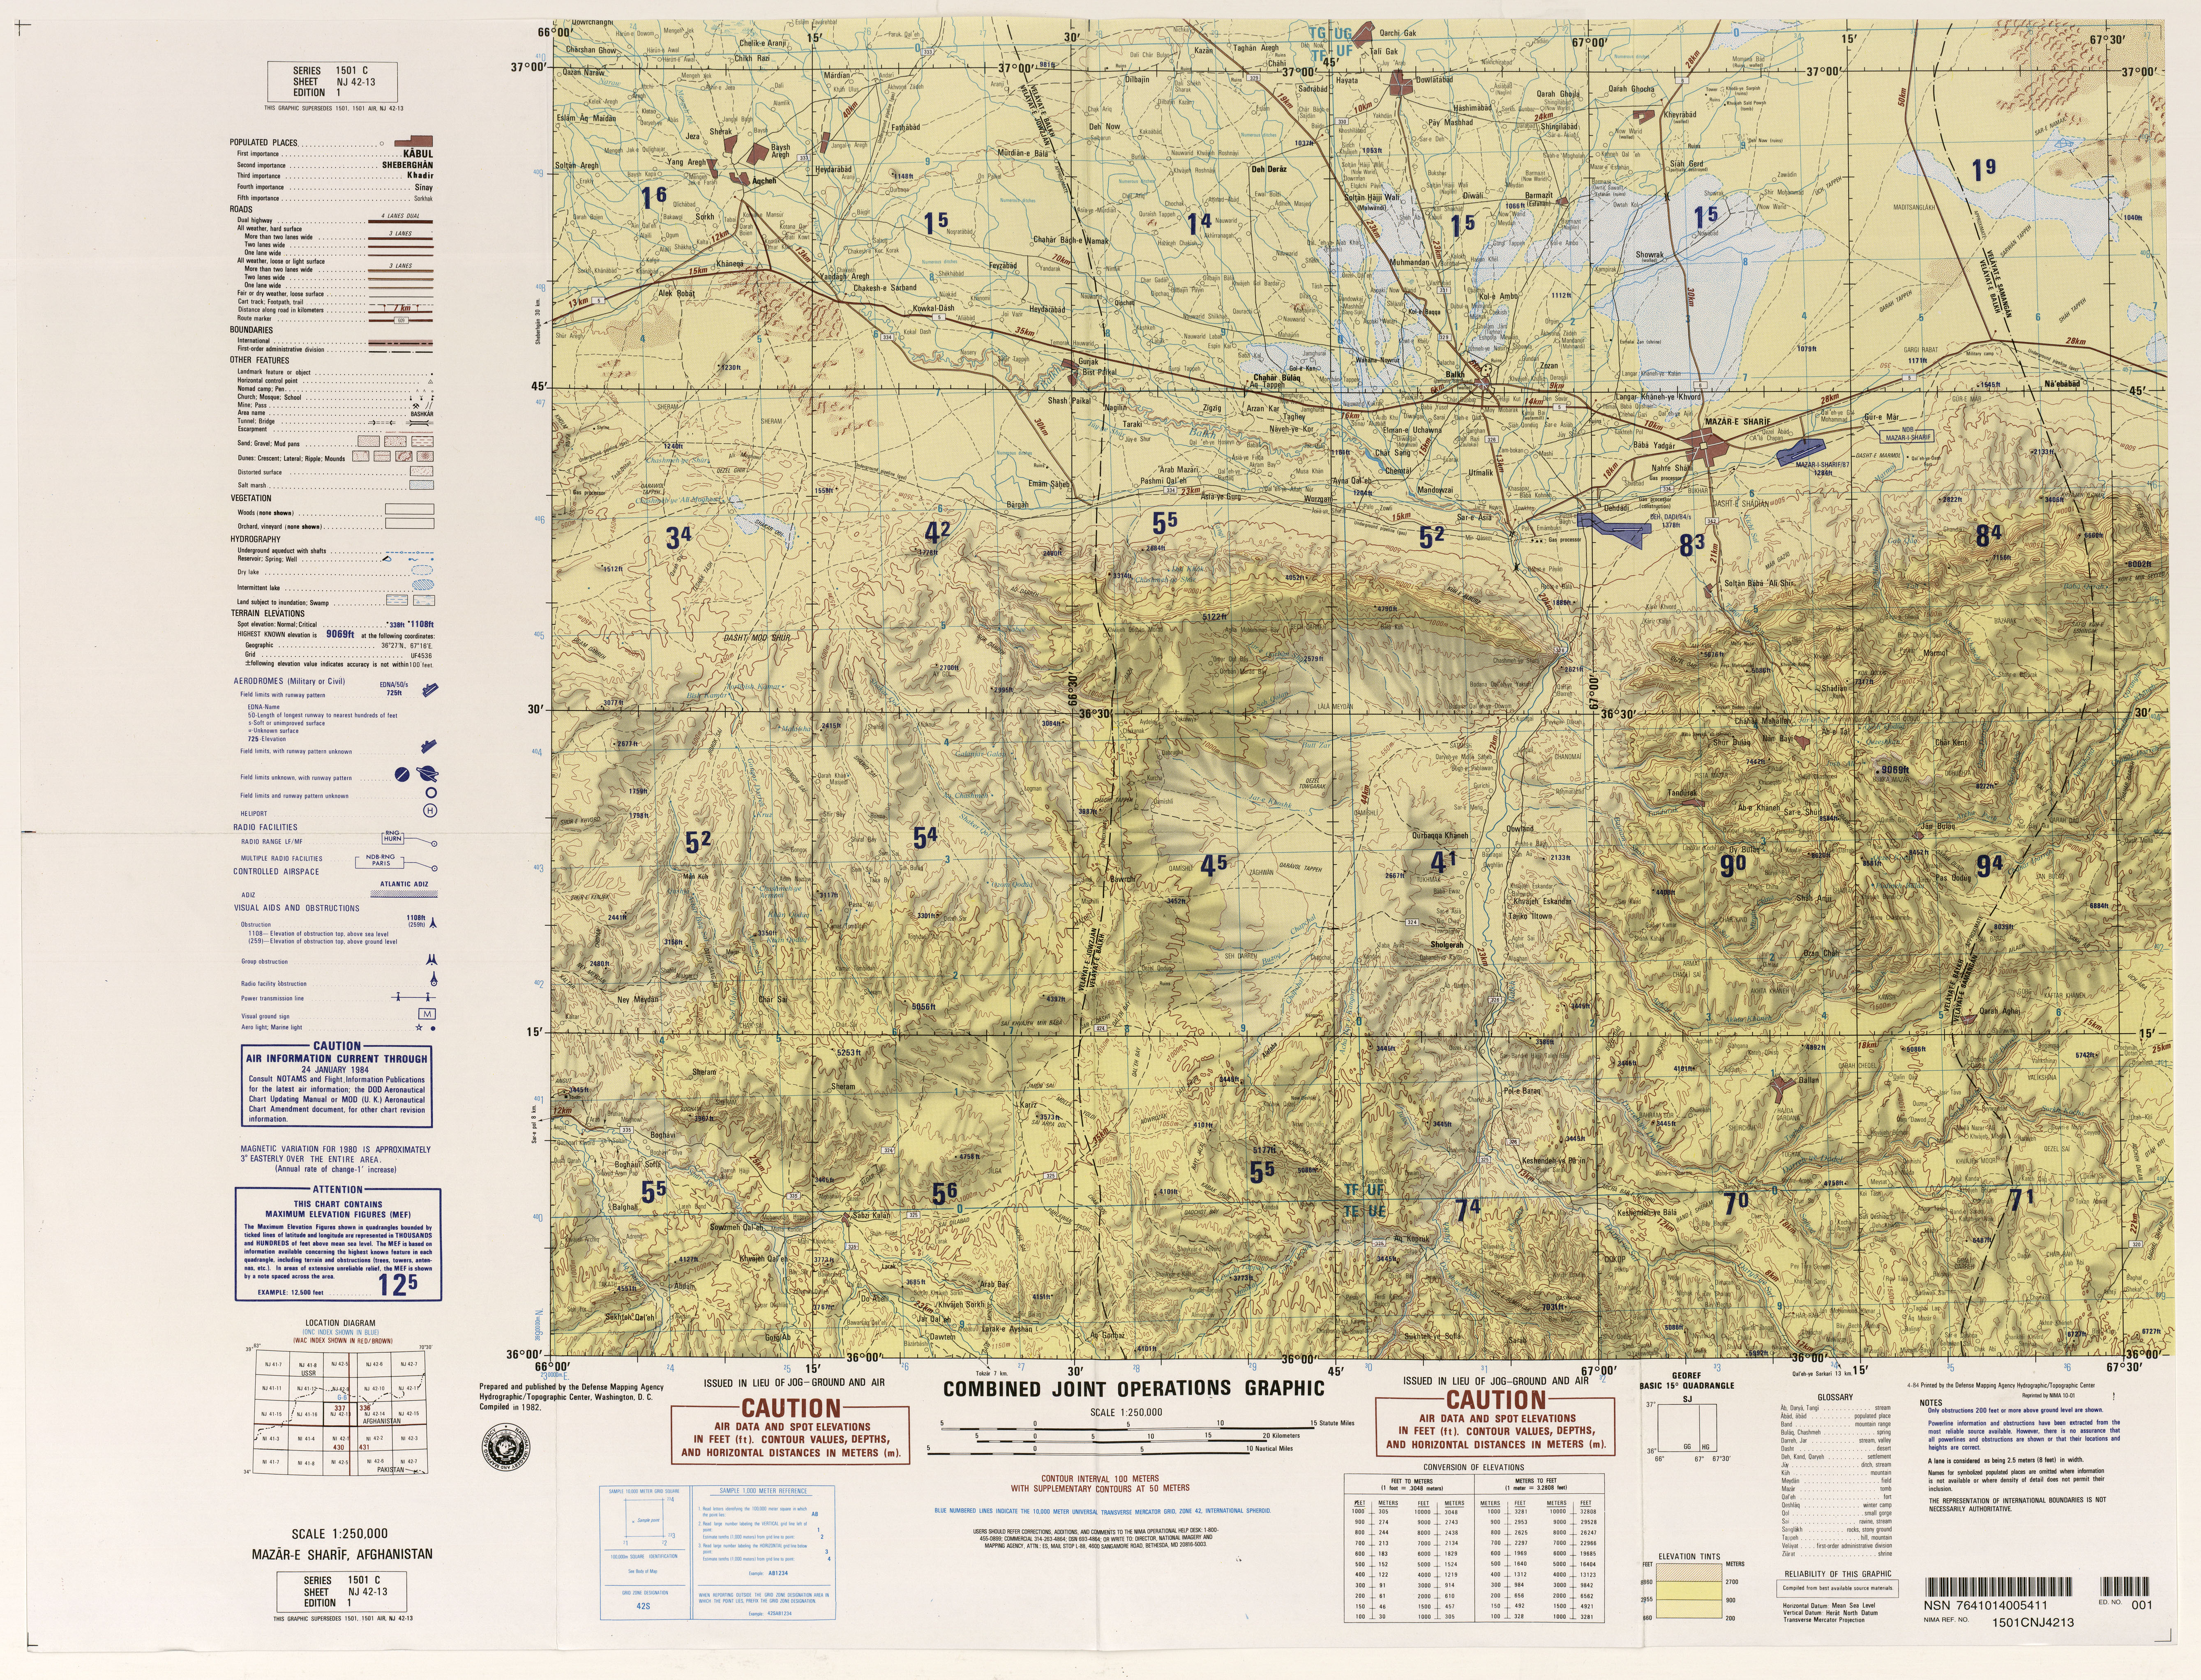 Russia Joint Operations Graphic - Perry-Castañeda Map Collection ...